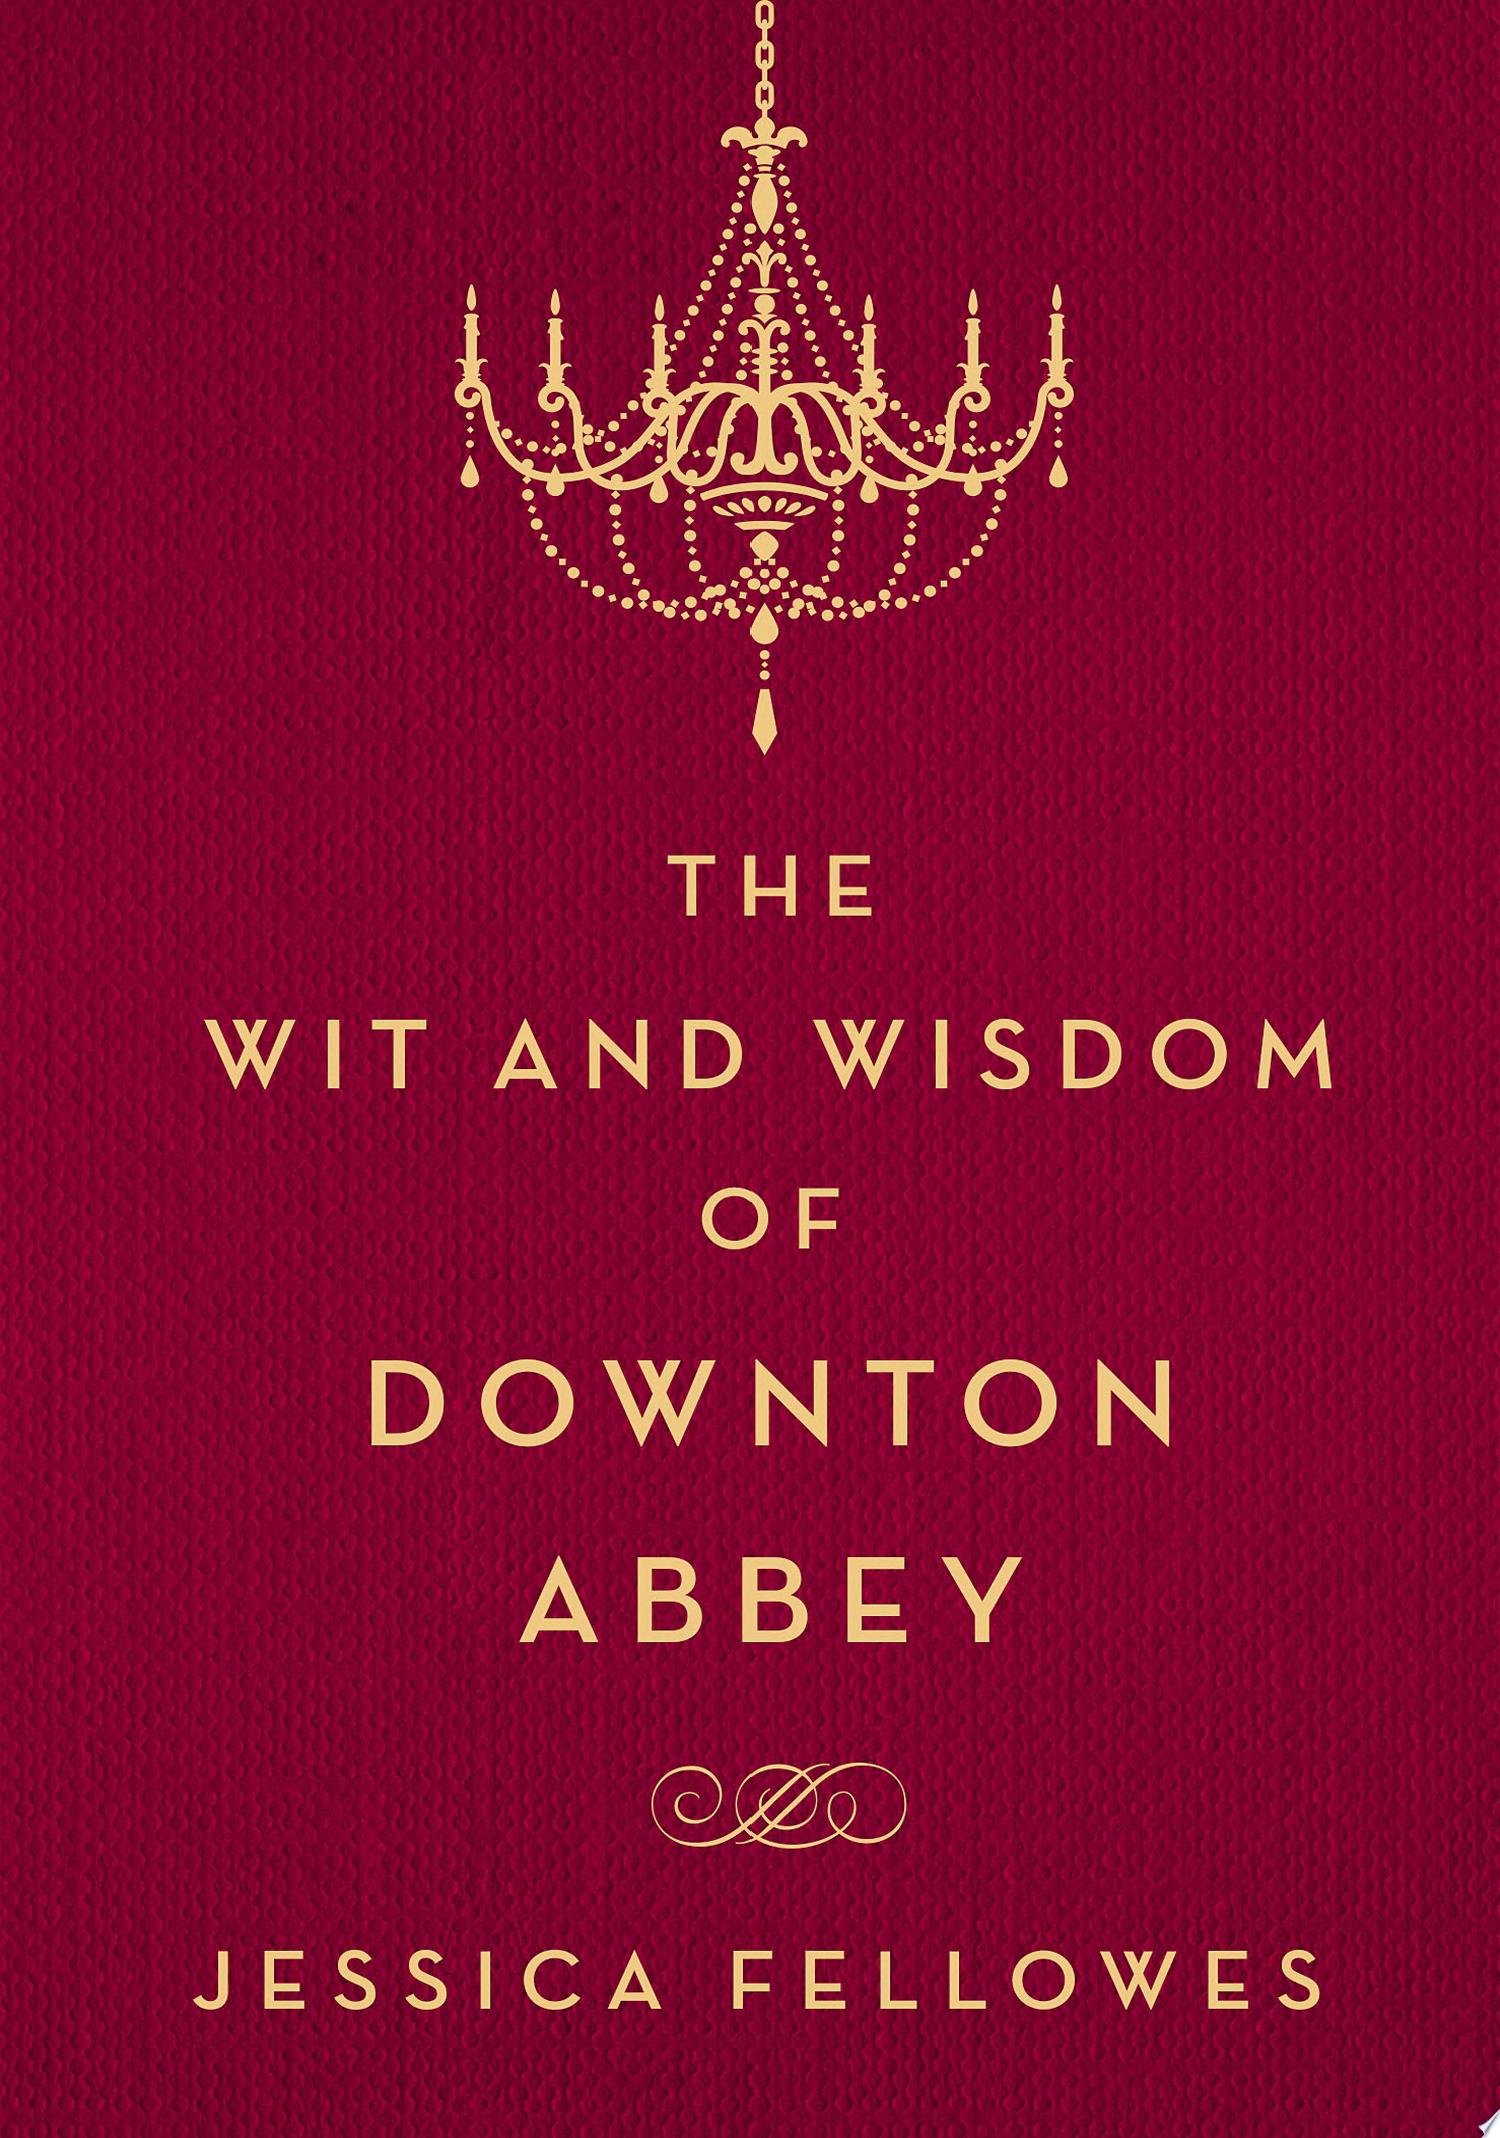 Image for "The Wit and Wisdom of Downton Abbey"